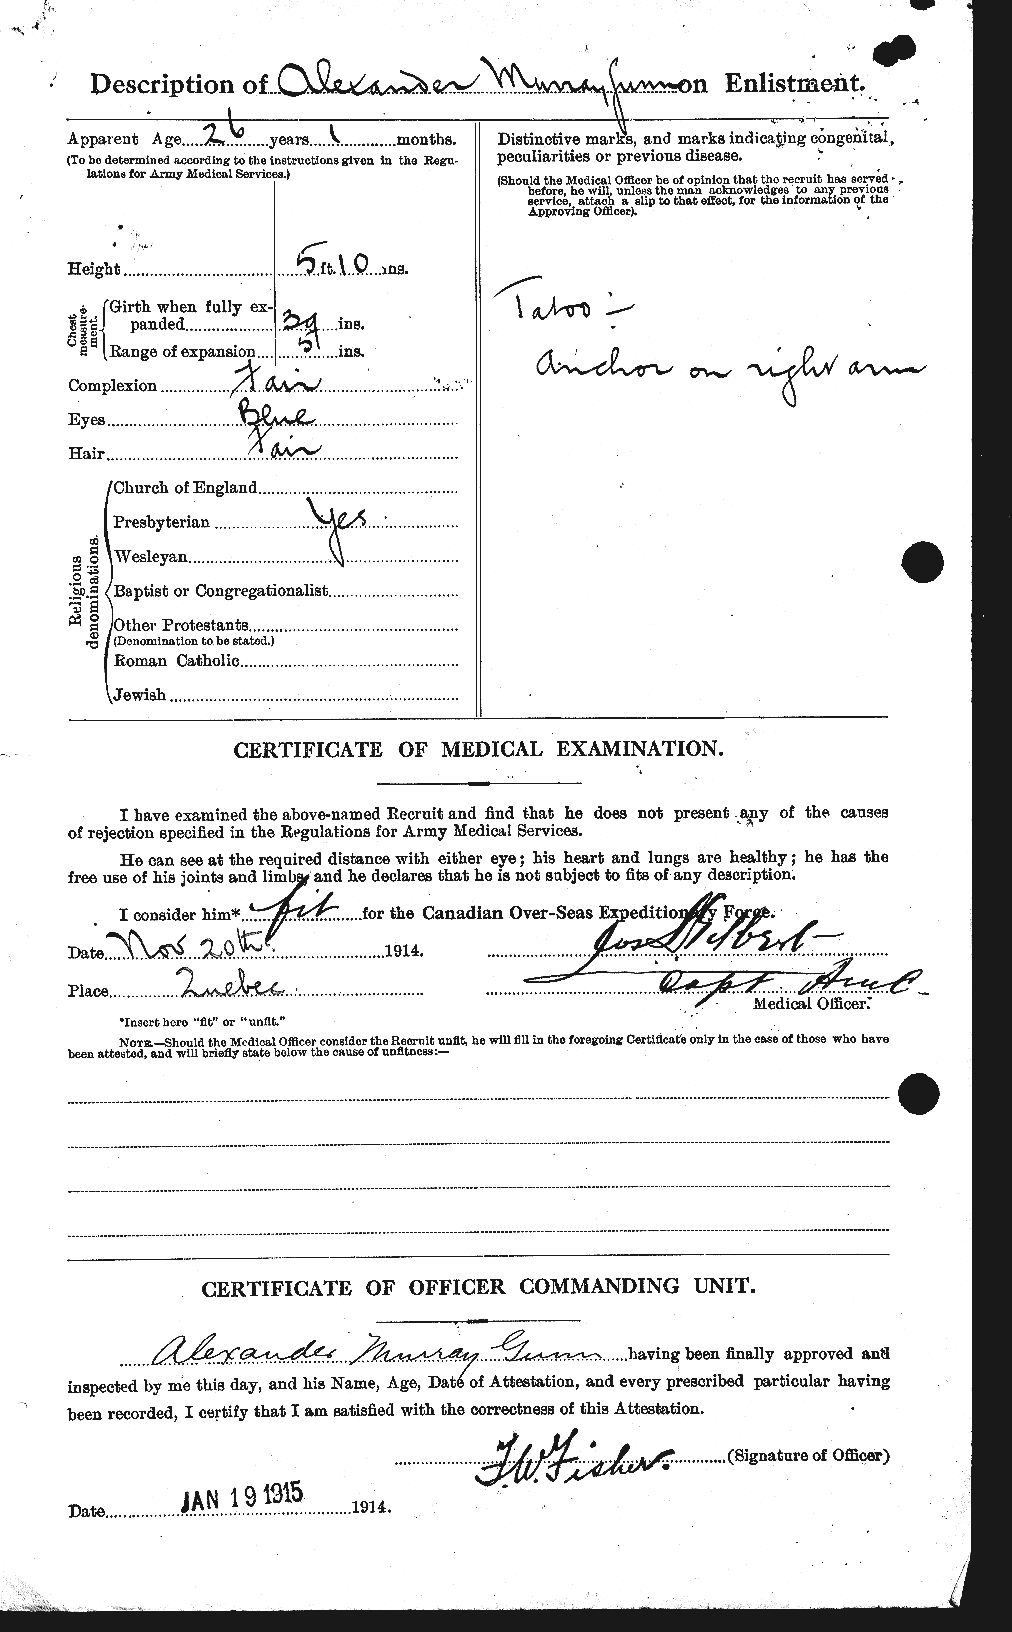 Personnel Records of the First World War - CEF 367993b